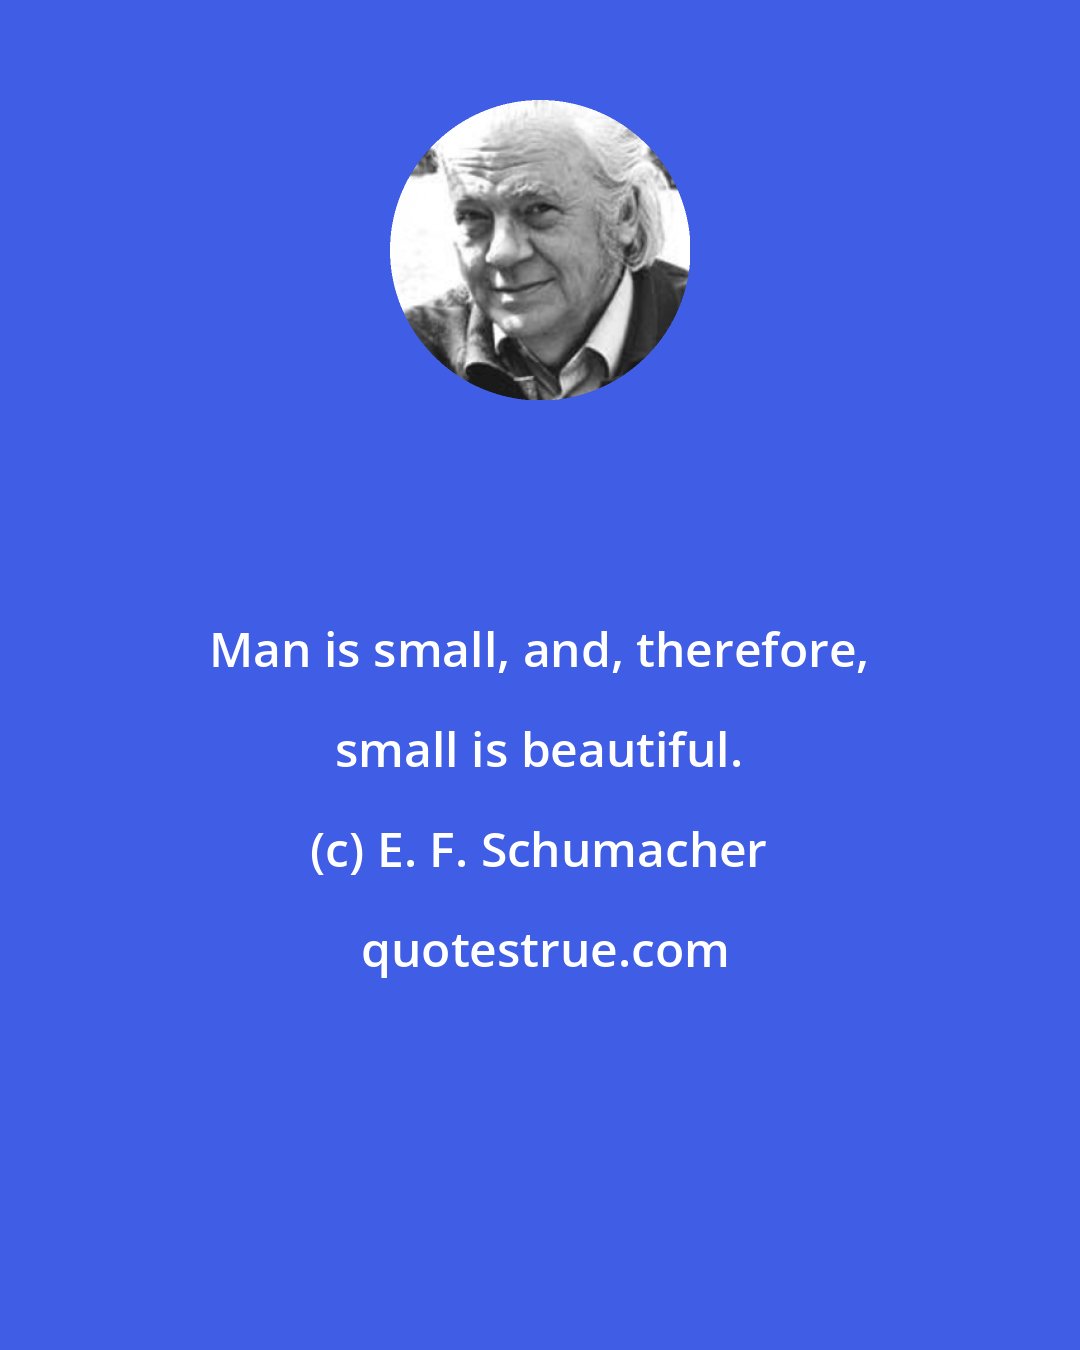 E. F. Schumacher: Man is small, and, therefore, small is beautiful.